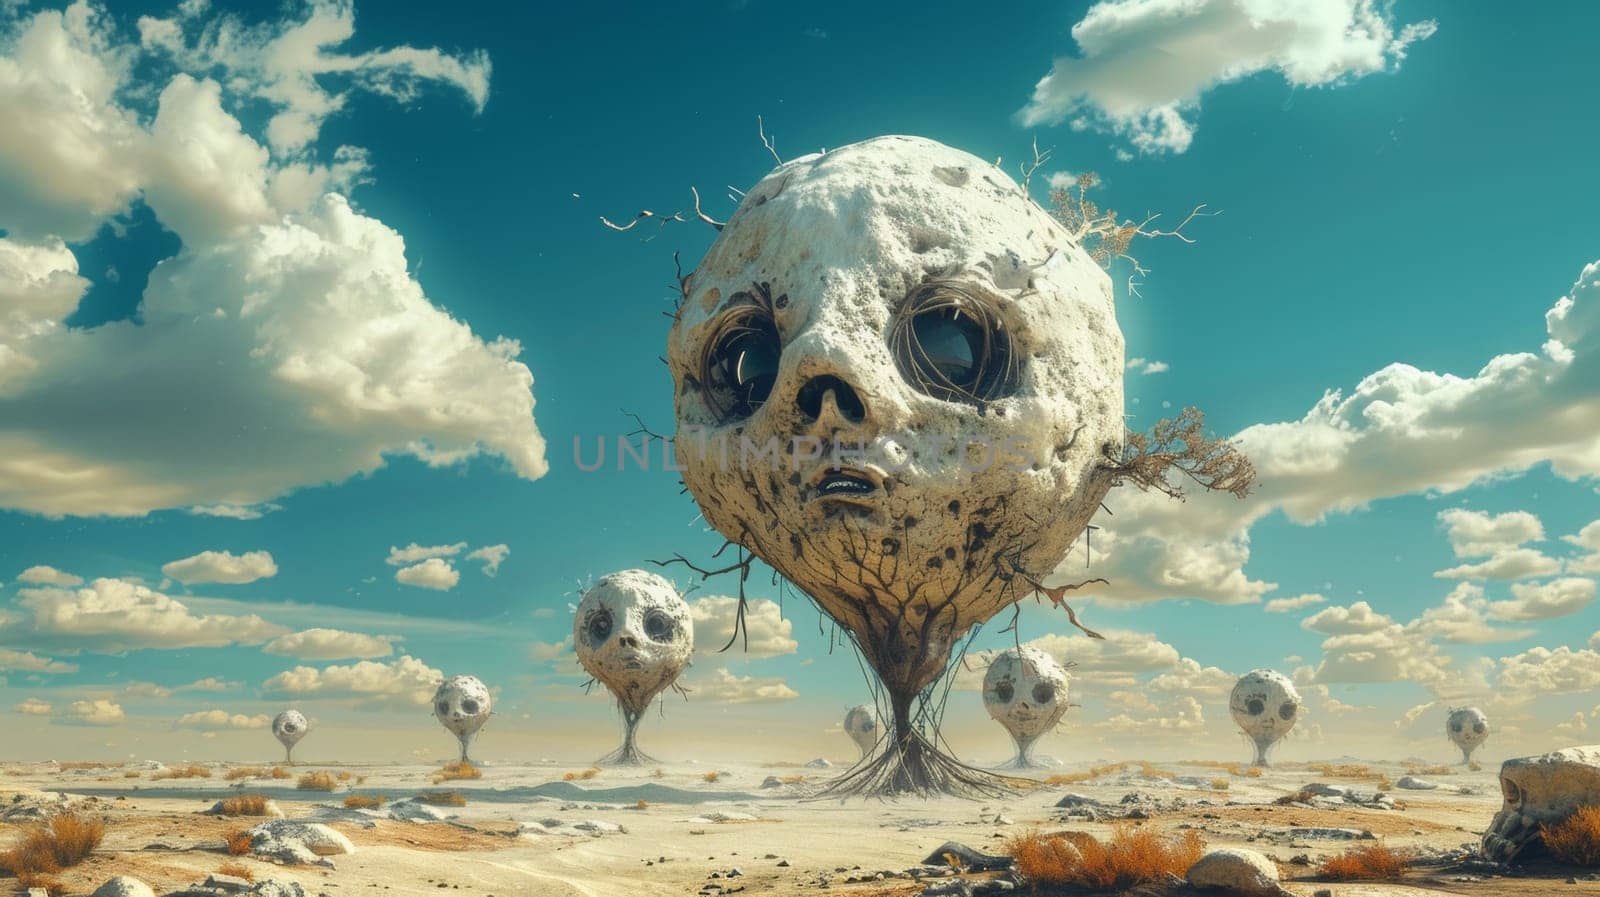 A group of strange looking heads are in a desert